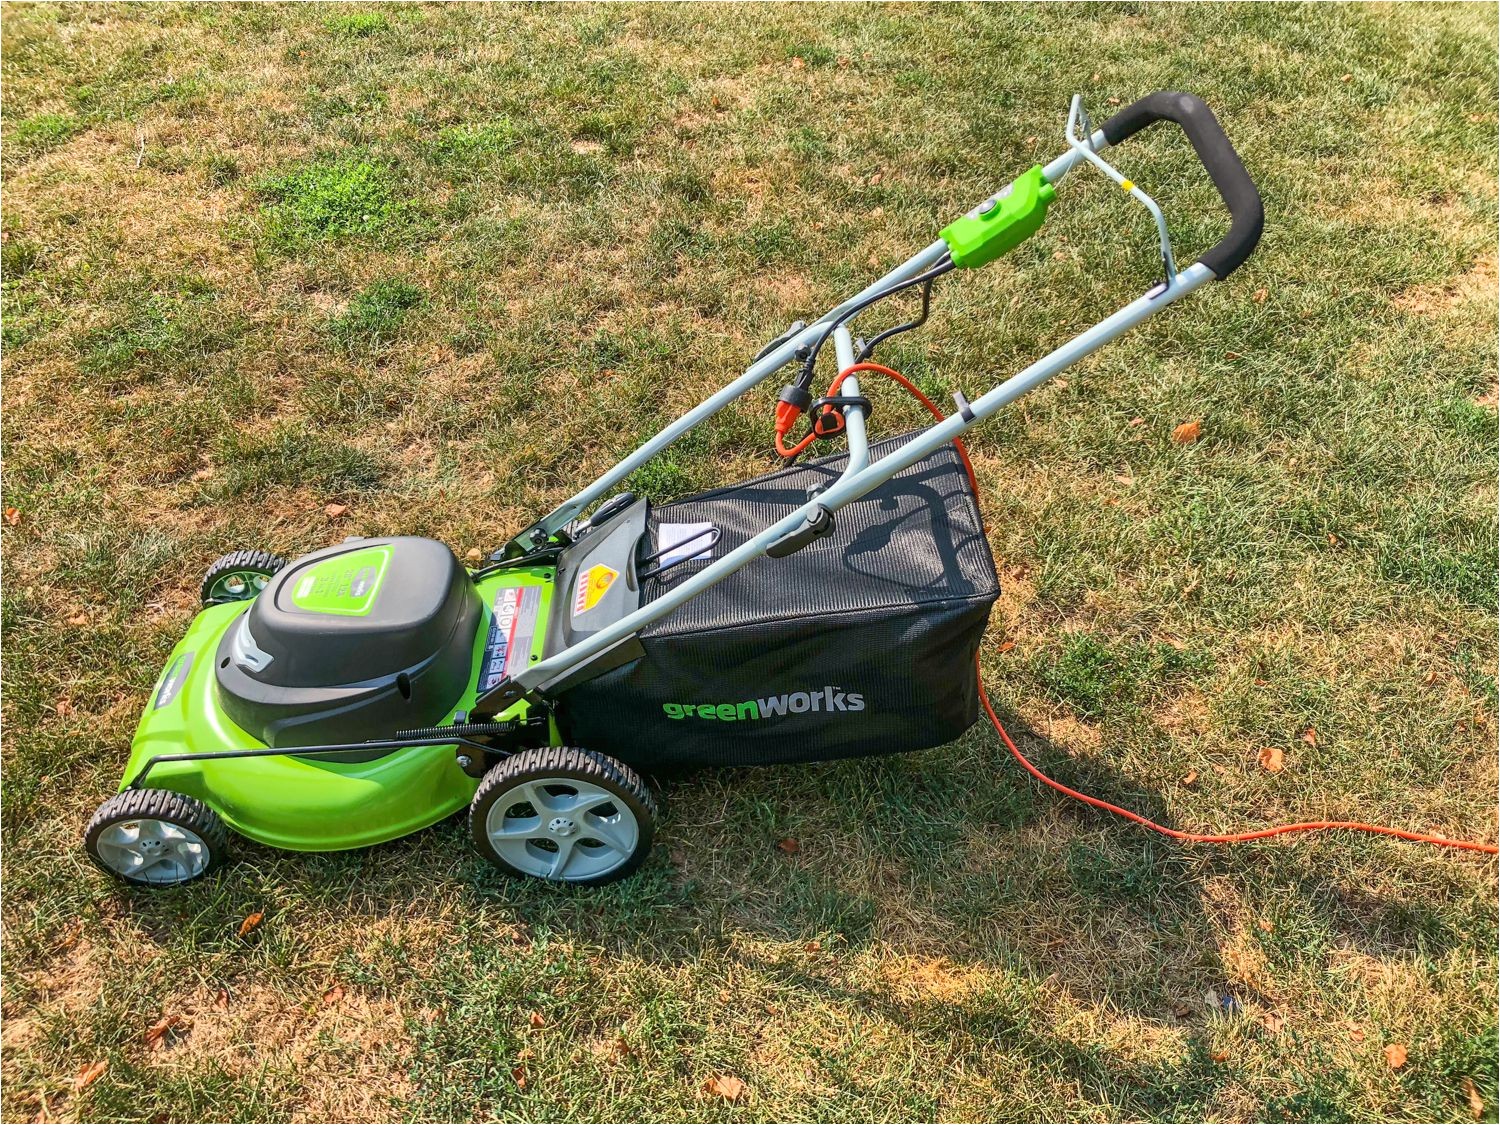 greenworks 12 amp corded 20 inch lawn mower